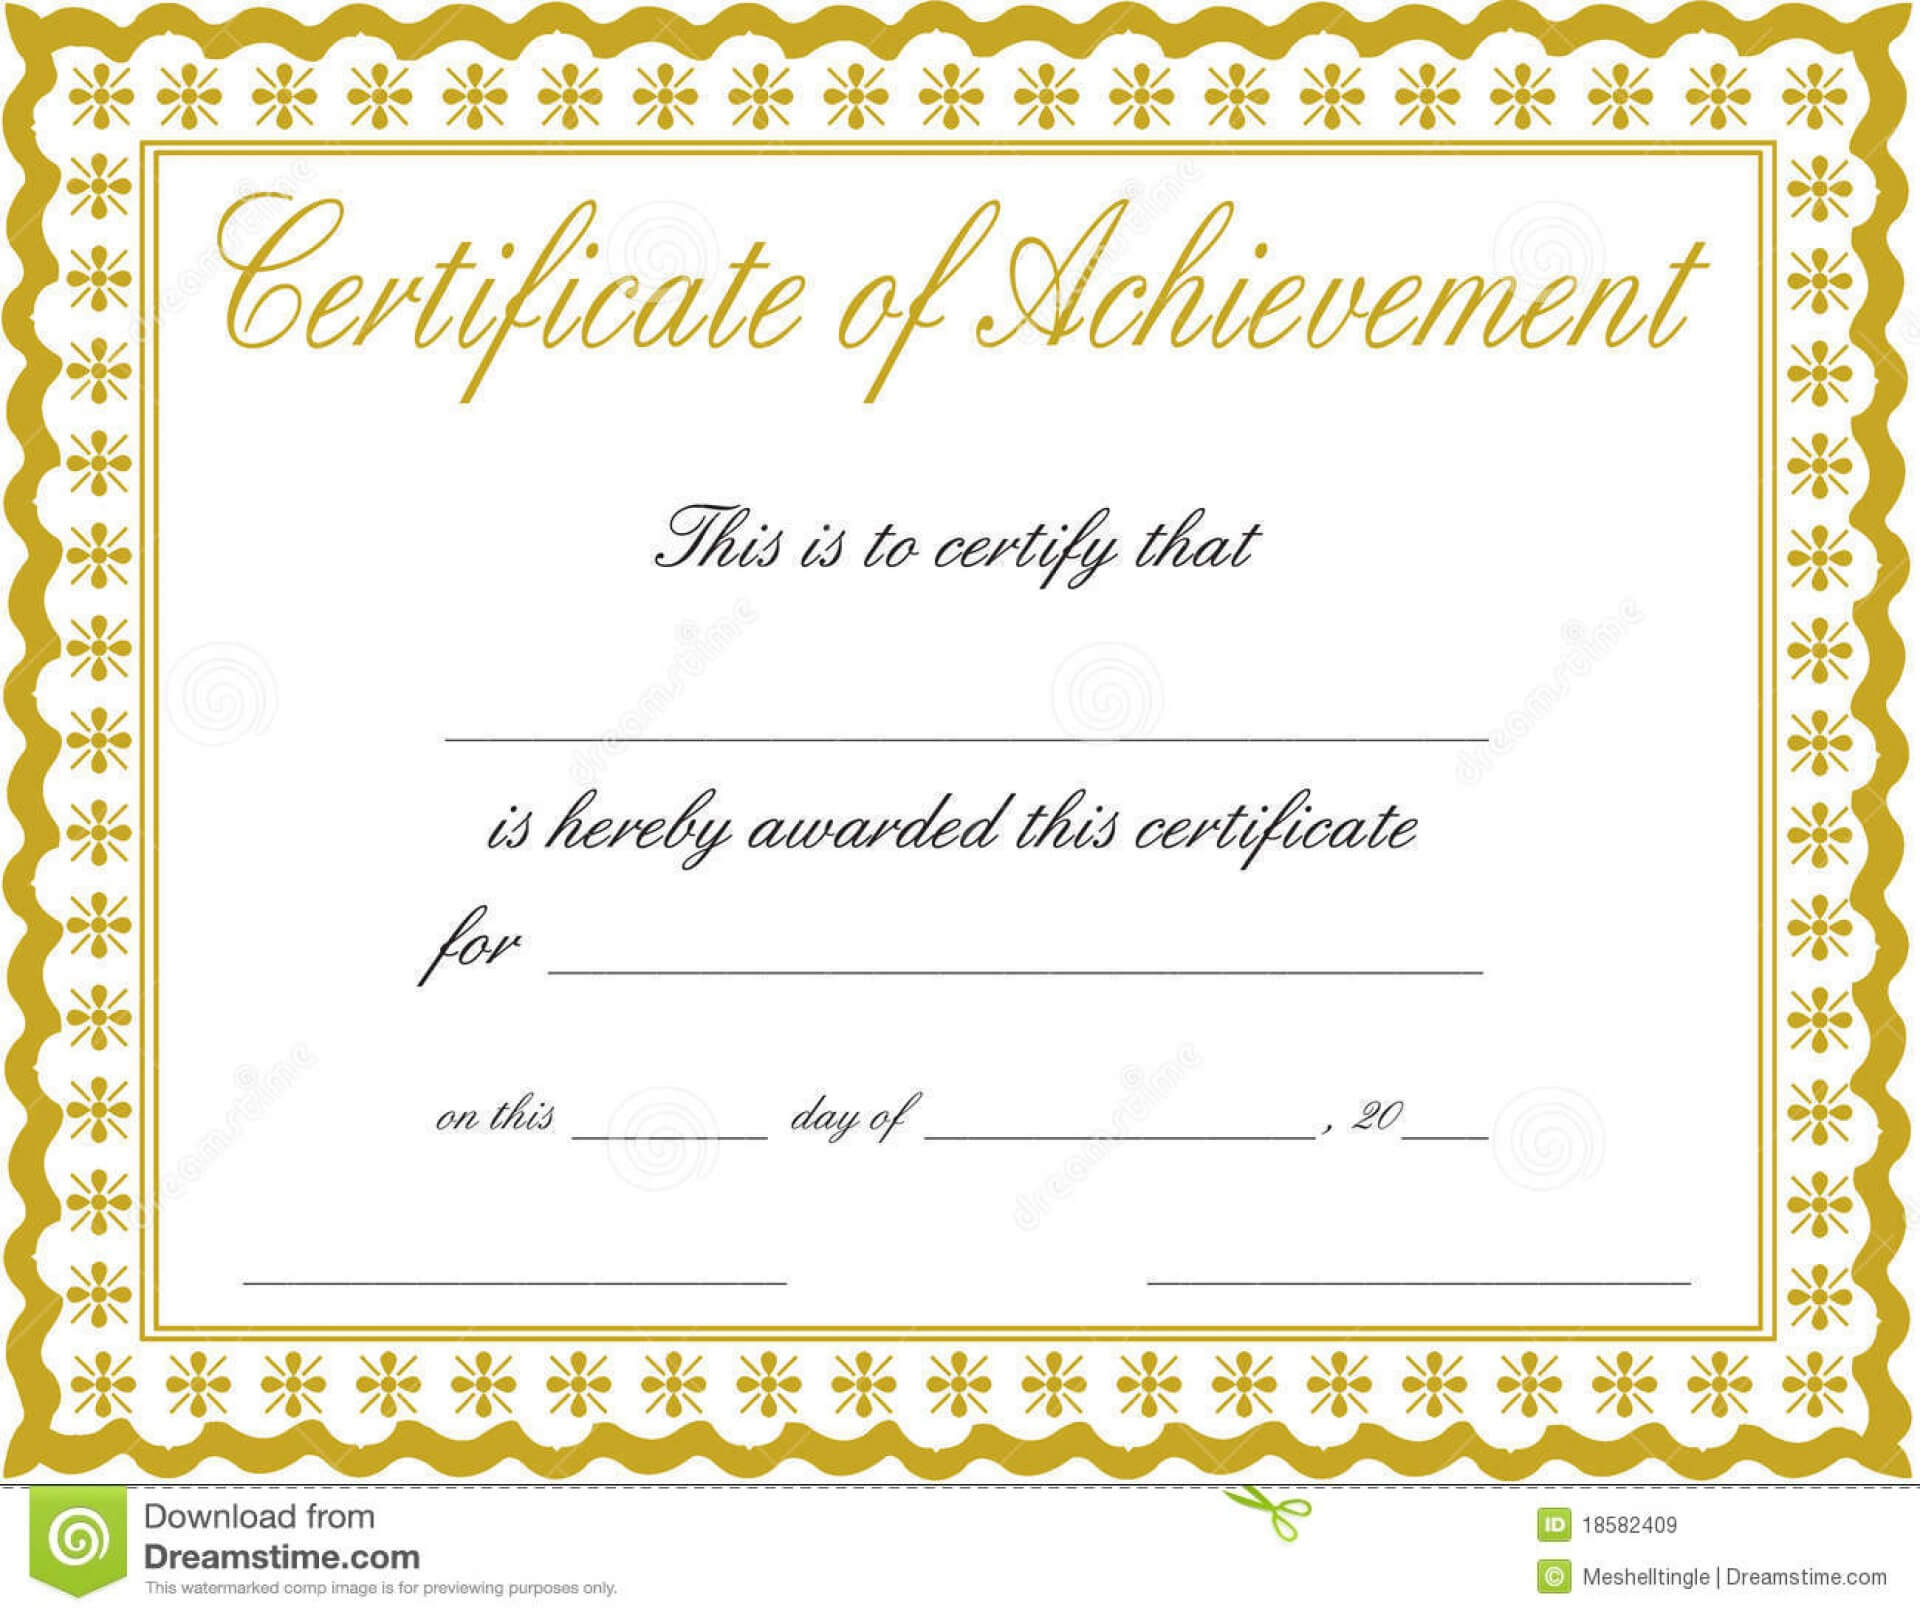 Free Customizable Printable Certificates Of Achievement Throughout Softball Certificate Templates Free